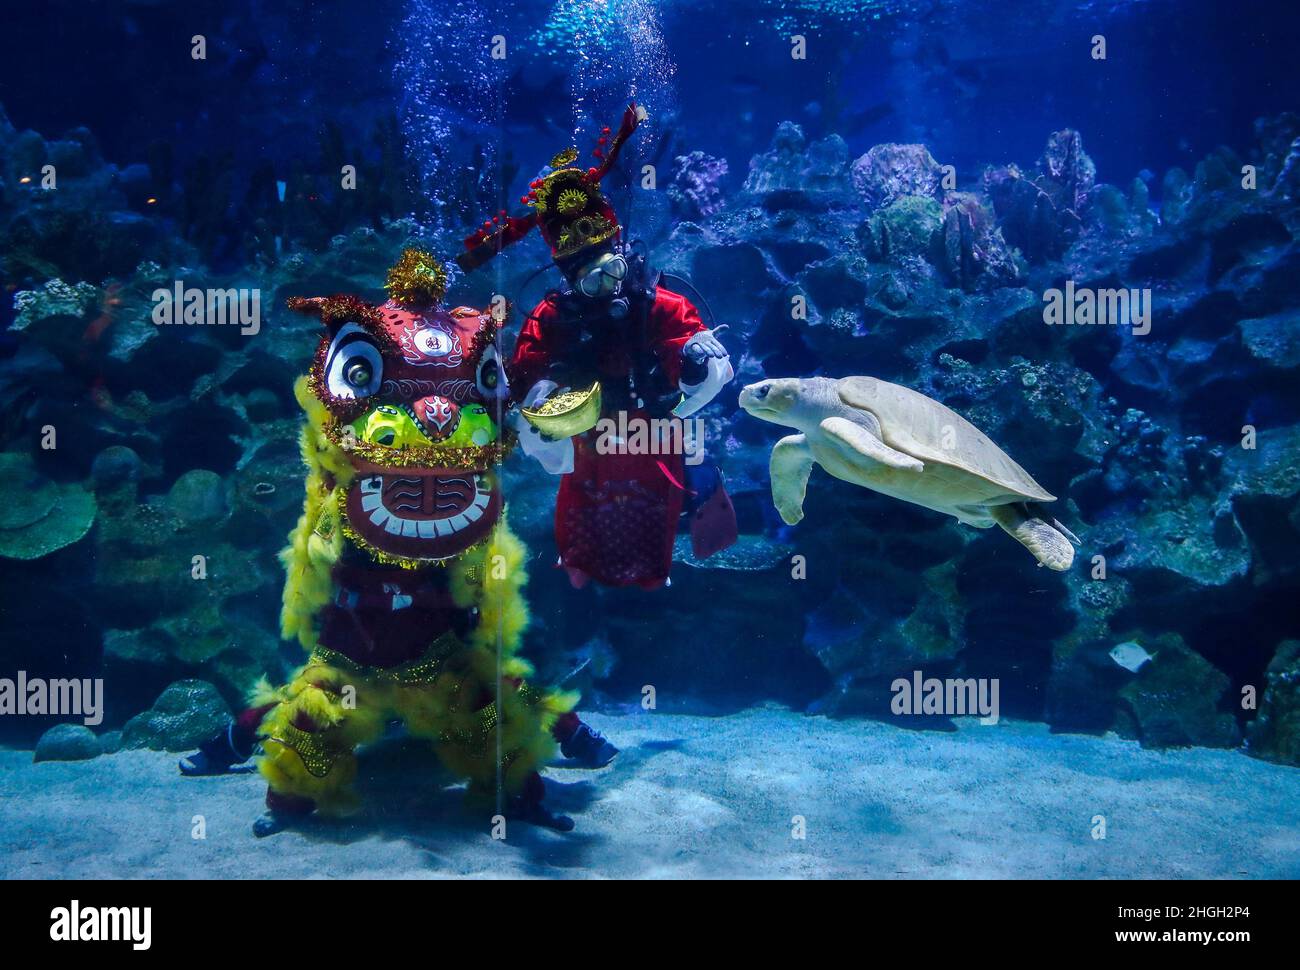 Kuala Lumpur, Malaysia. 21st Jan, 2022. Divers dressed in costumes perform a traditional lion dance at the Aquaria KLCC ahead of the Lunar New Year celebrations.Chinese around the world will be celebrating the Chinese Lunar New Year and welcome the year of Tiger which falls on February 1, 2022. Credit: SOPA Images Limited/Alamy Live News Stock Photo